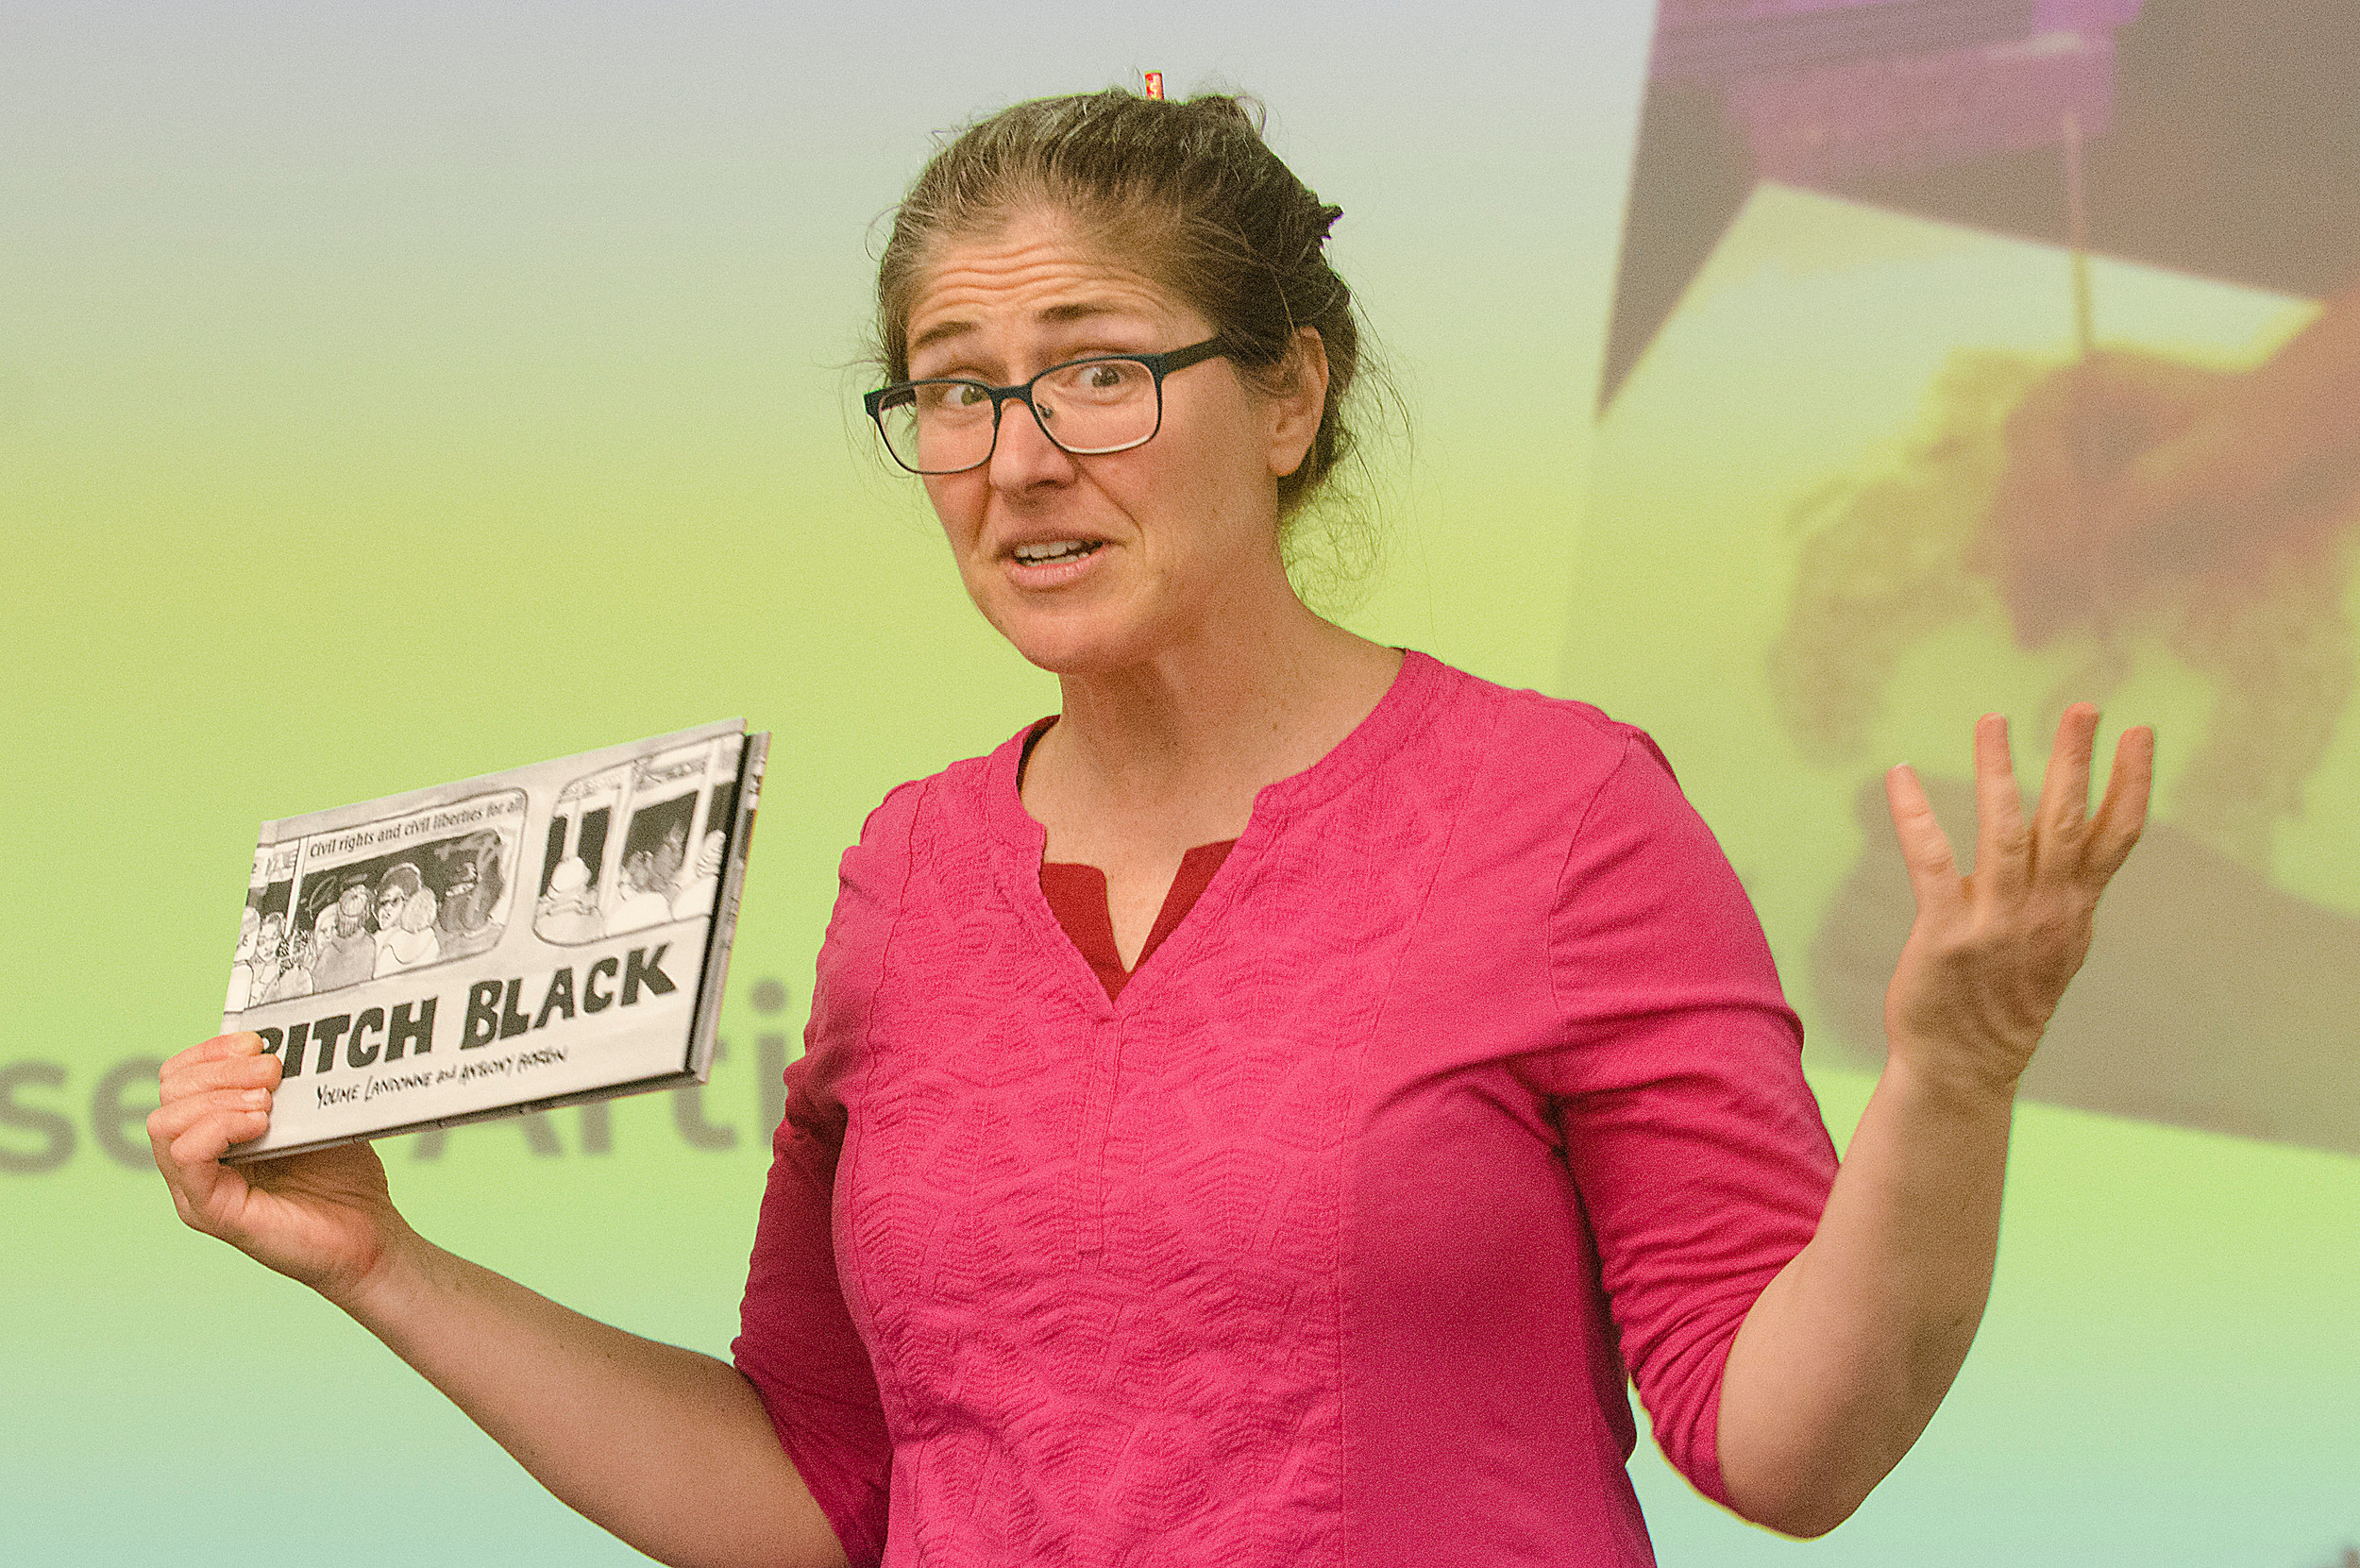 Author Youme Landowne holds a copy of her graphic novel, “Pitch Black: Don't Be Skerd,” which she co-wrote with Anthony Horton, a homeless artist who lived in the New York City subway system. She was speaking to Portsmouth Middle School students as part of the All Day Audible With Authors Event on Friday.